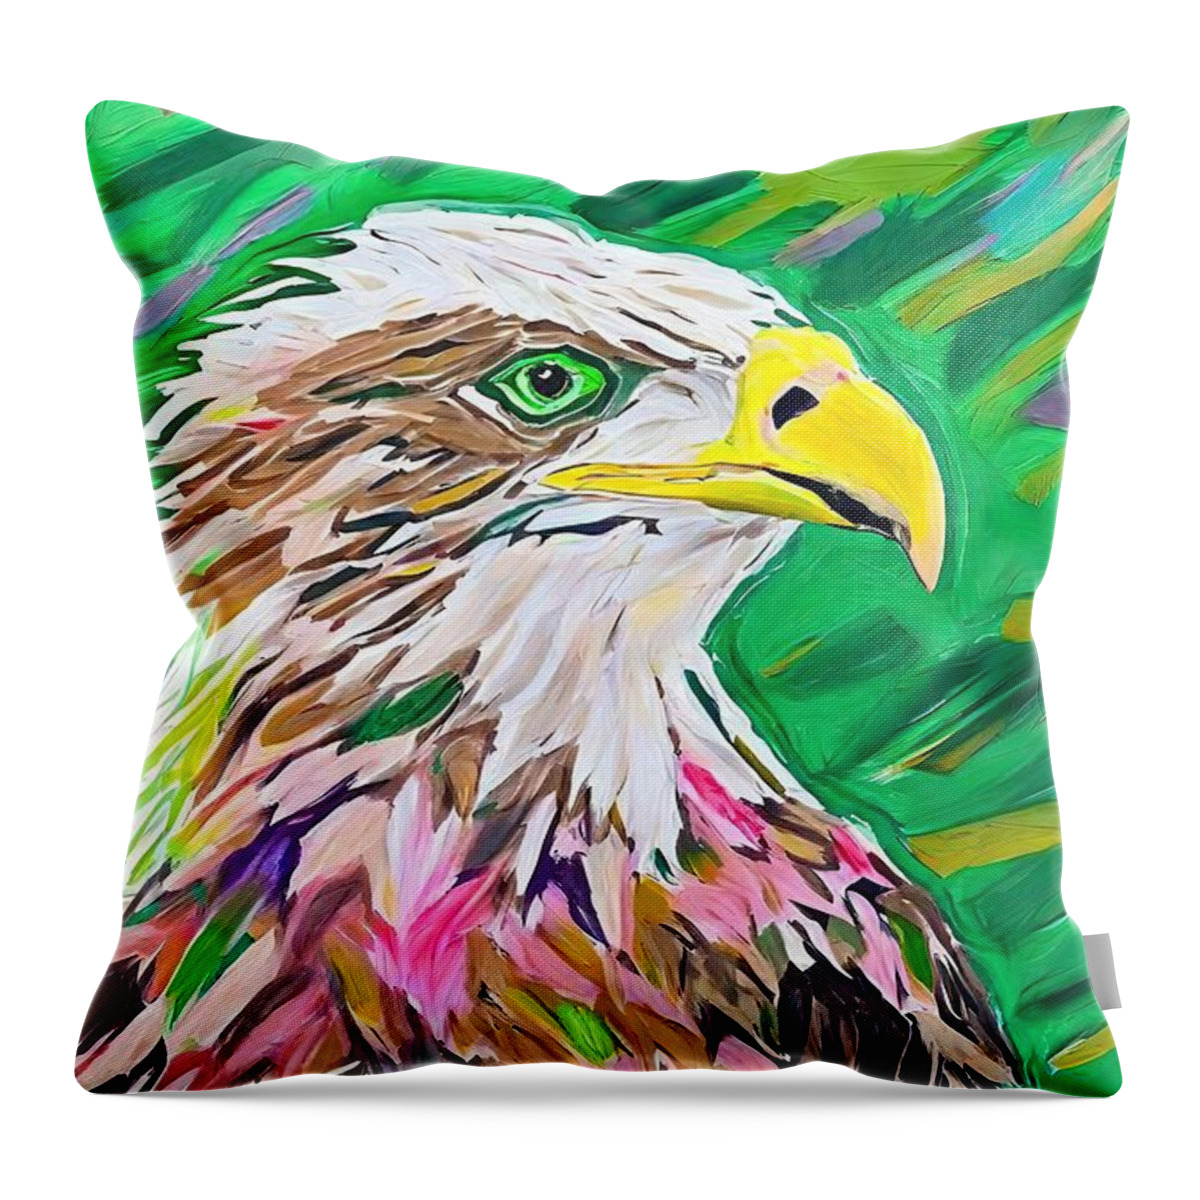 Illustration Throw Pillow featuring the painting Painting American Eagle illustration animal eagle by N Akkash